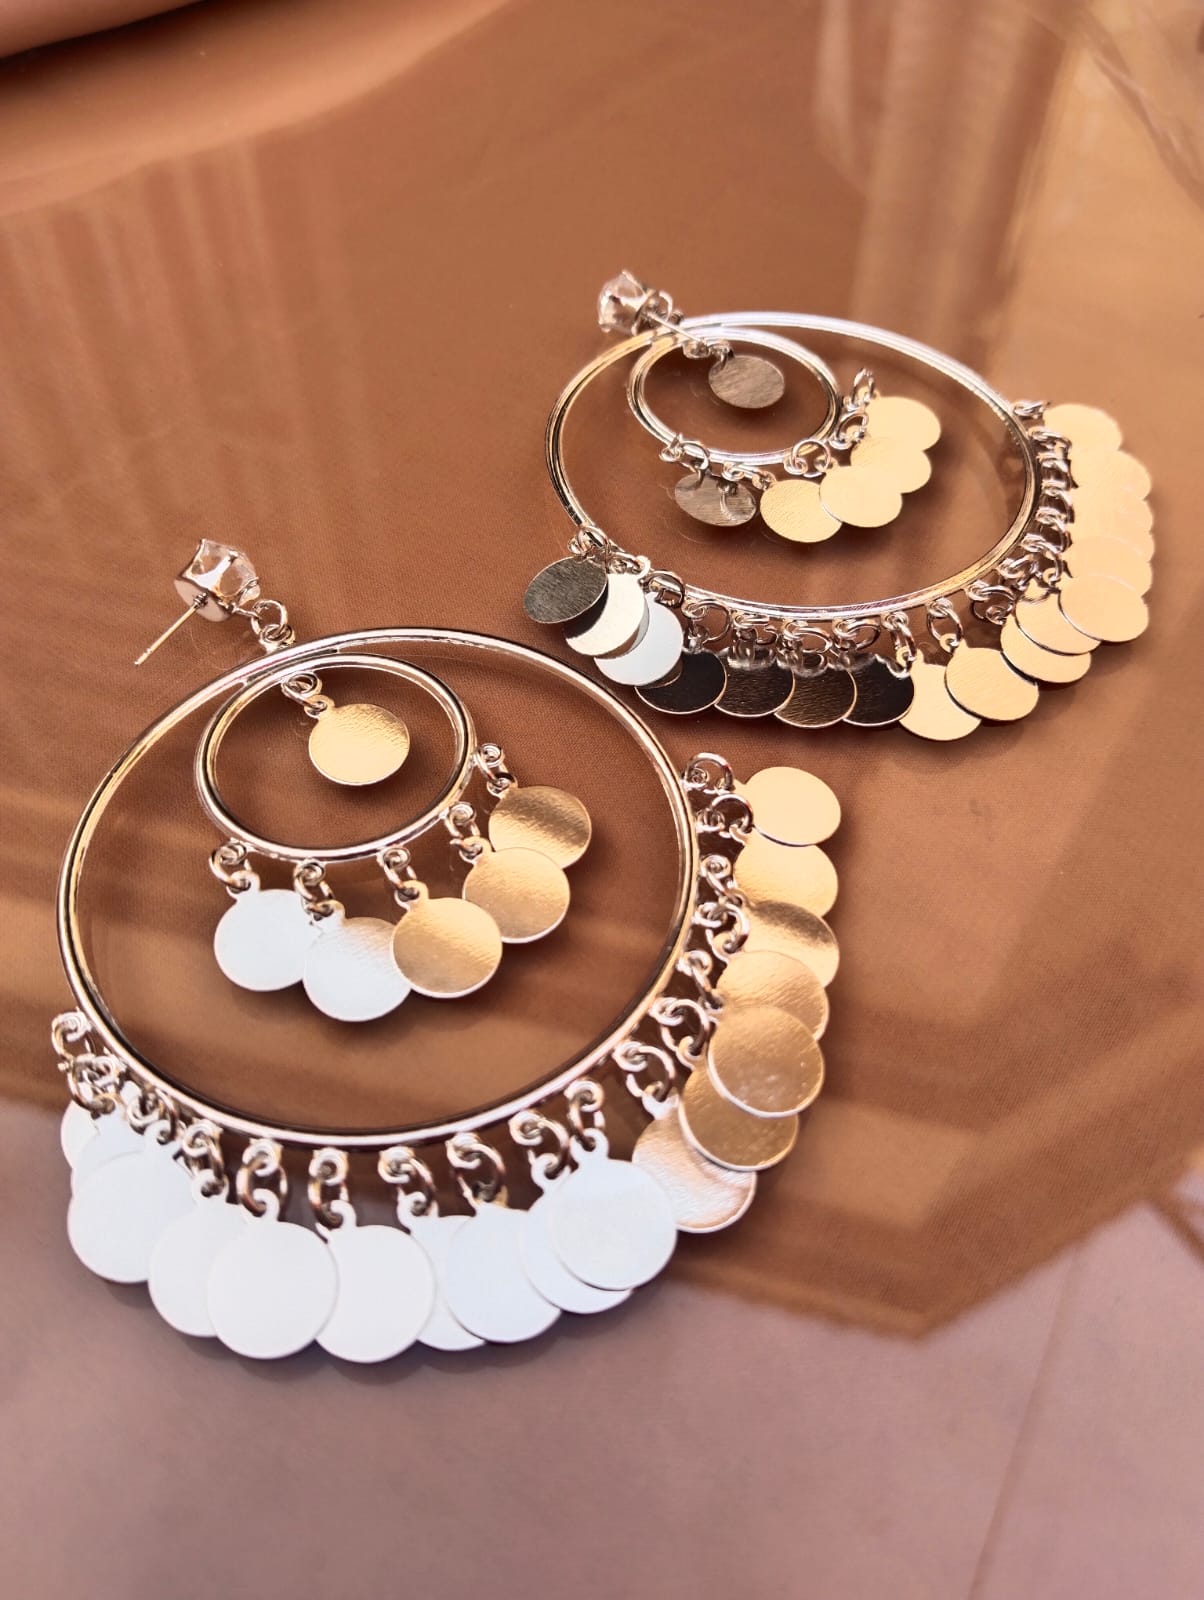 "Trinketts Dazzling Hoop Ensemble Earrings - Golden Shiny Hoops with Coin-Like Hangings, Lightweight and Statement-Making, Approx. 3 Inches in Size, Affordable Luxury at Rs. 380."